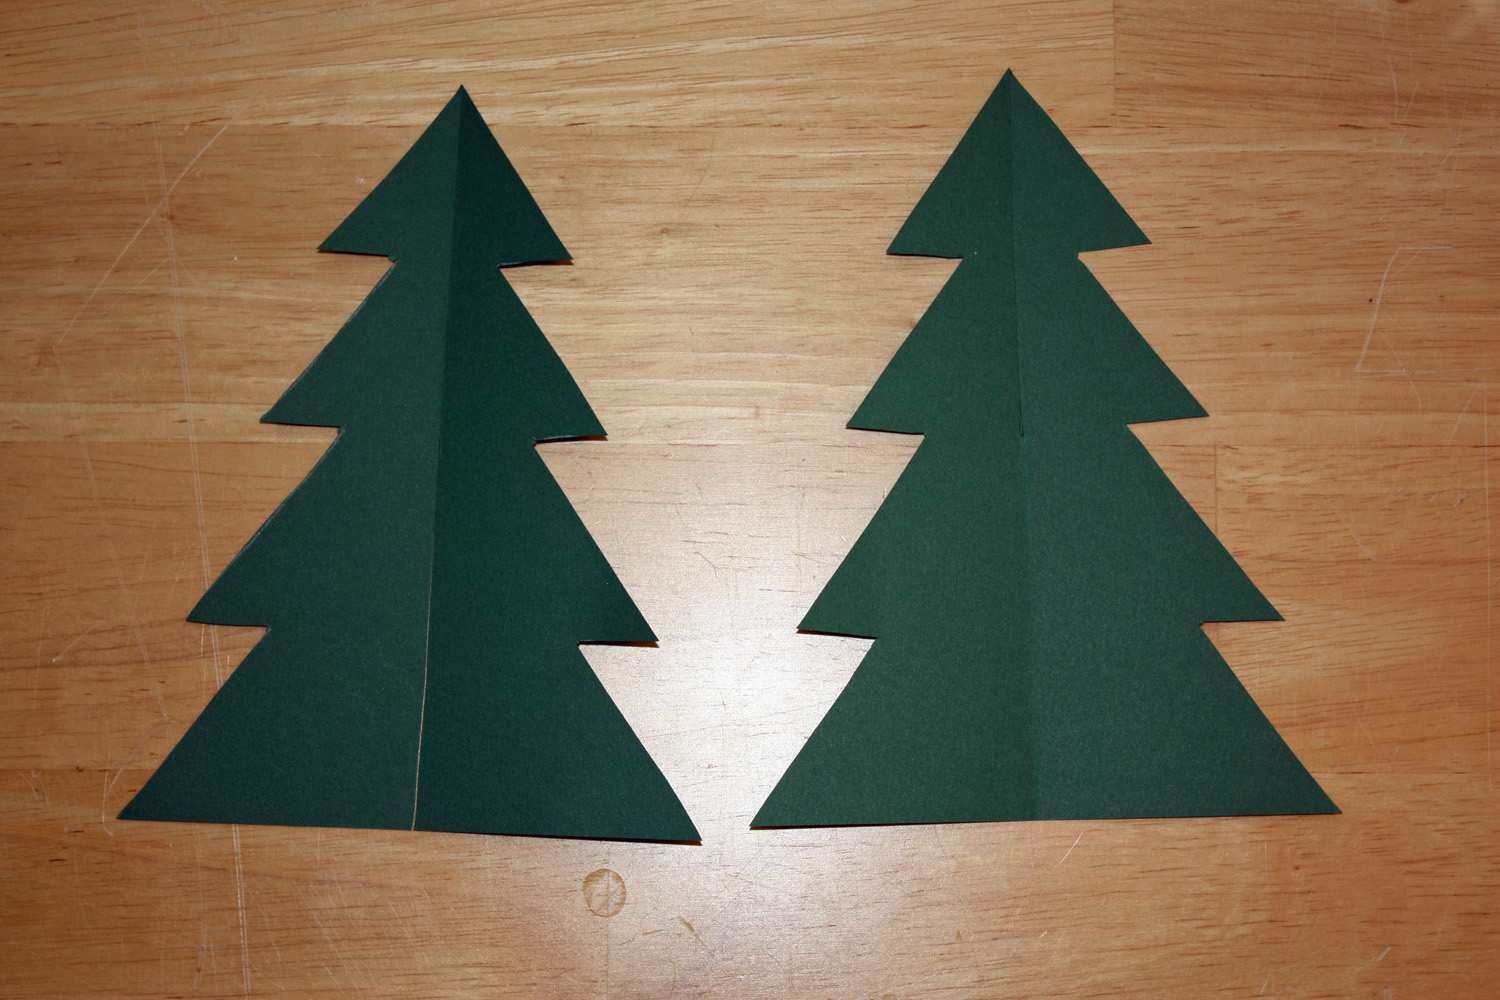 12 Christmas Tree Template For Card Making For Free with Christmas Tree Template For Card Making